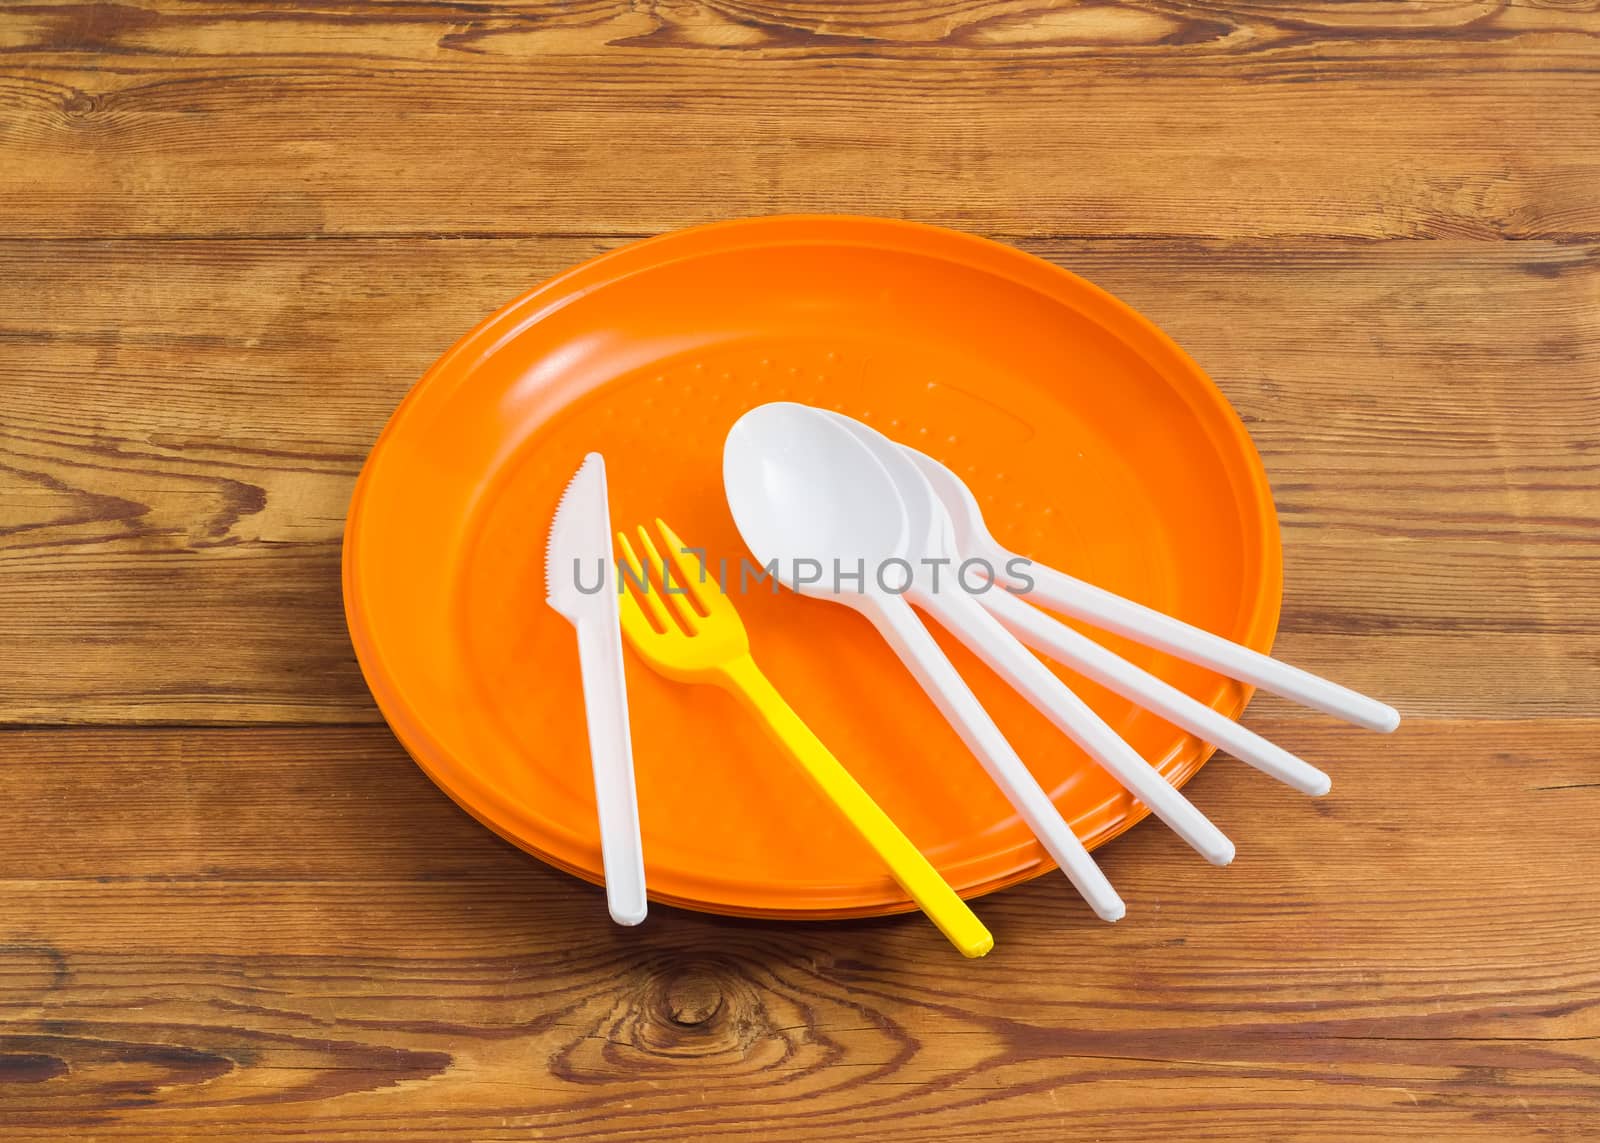 Several disposable plastic white spoons, knife, yellow fork on the pile of the orange plastic disposable plates on a surface of the old wooden planks
